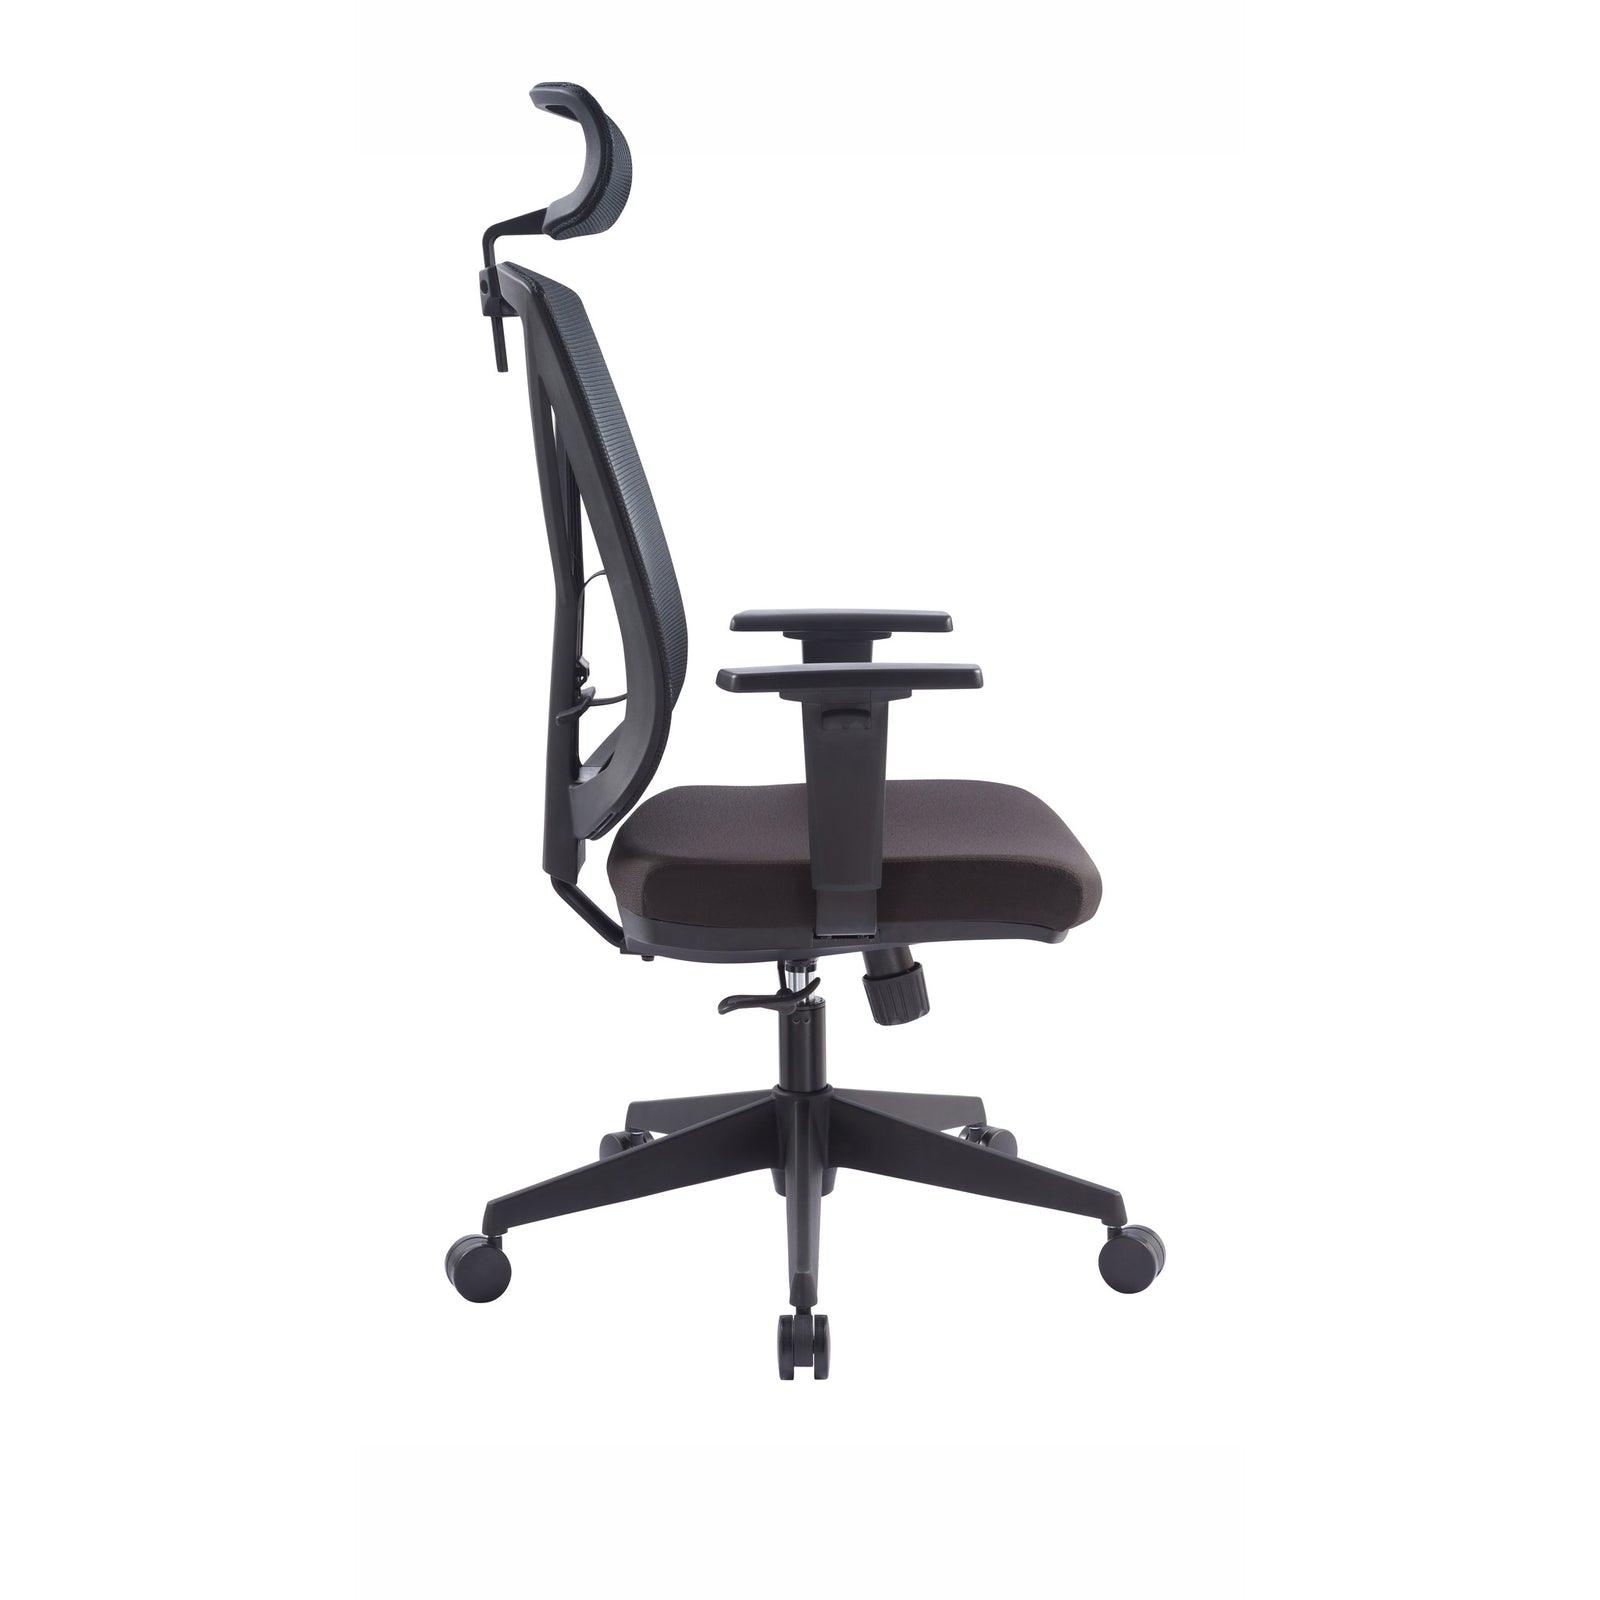 Mesh Ergonomic Office Chair with Headrest - Black - Office/Gaming ChairsOC8256-UN 7